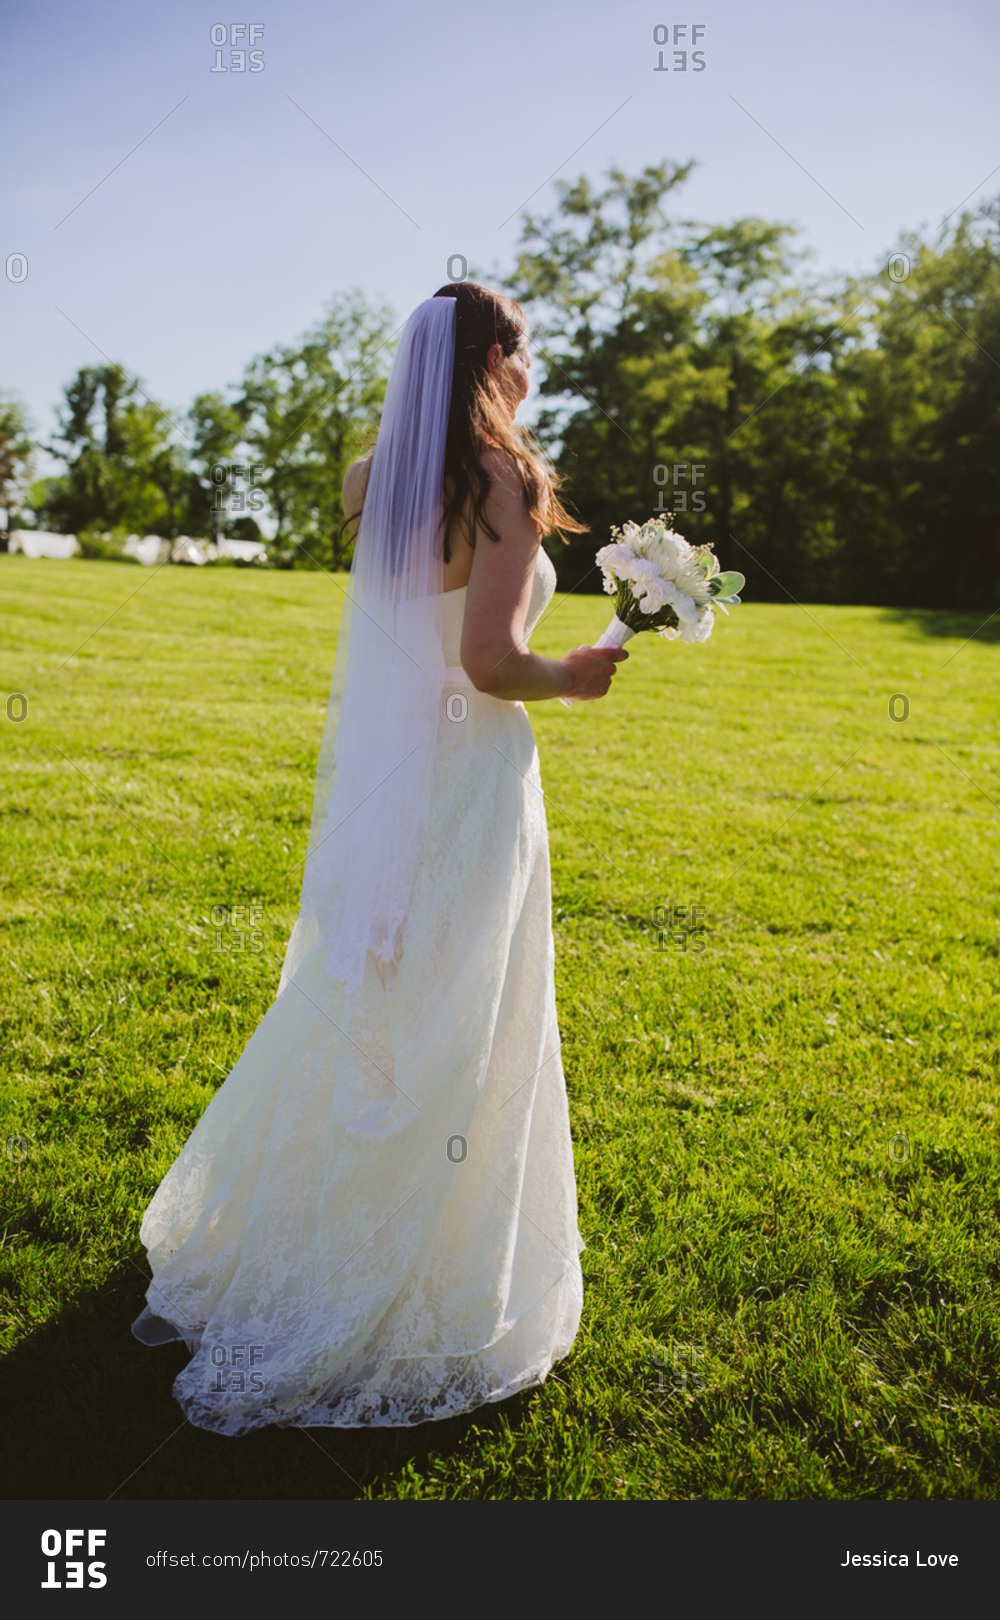 Back view of bride holding bridal bouquet at outdoor farm wedding